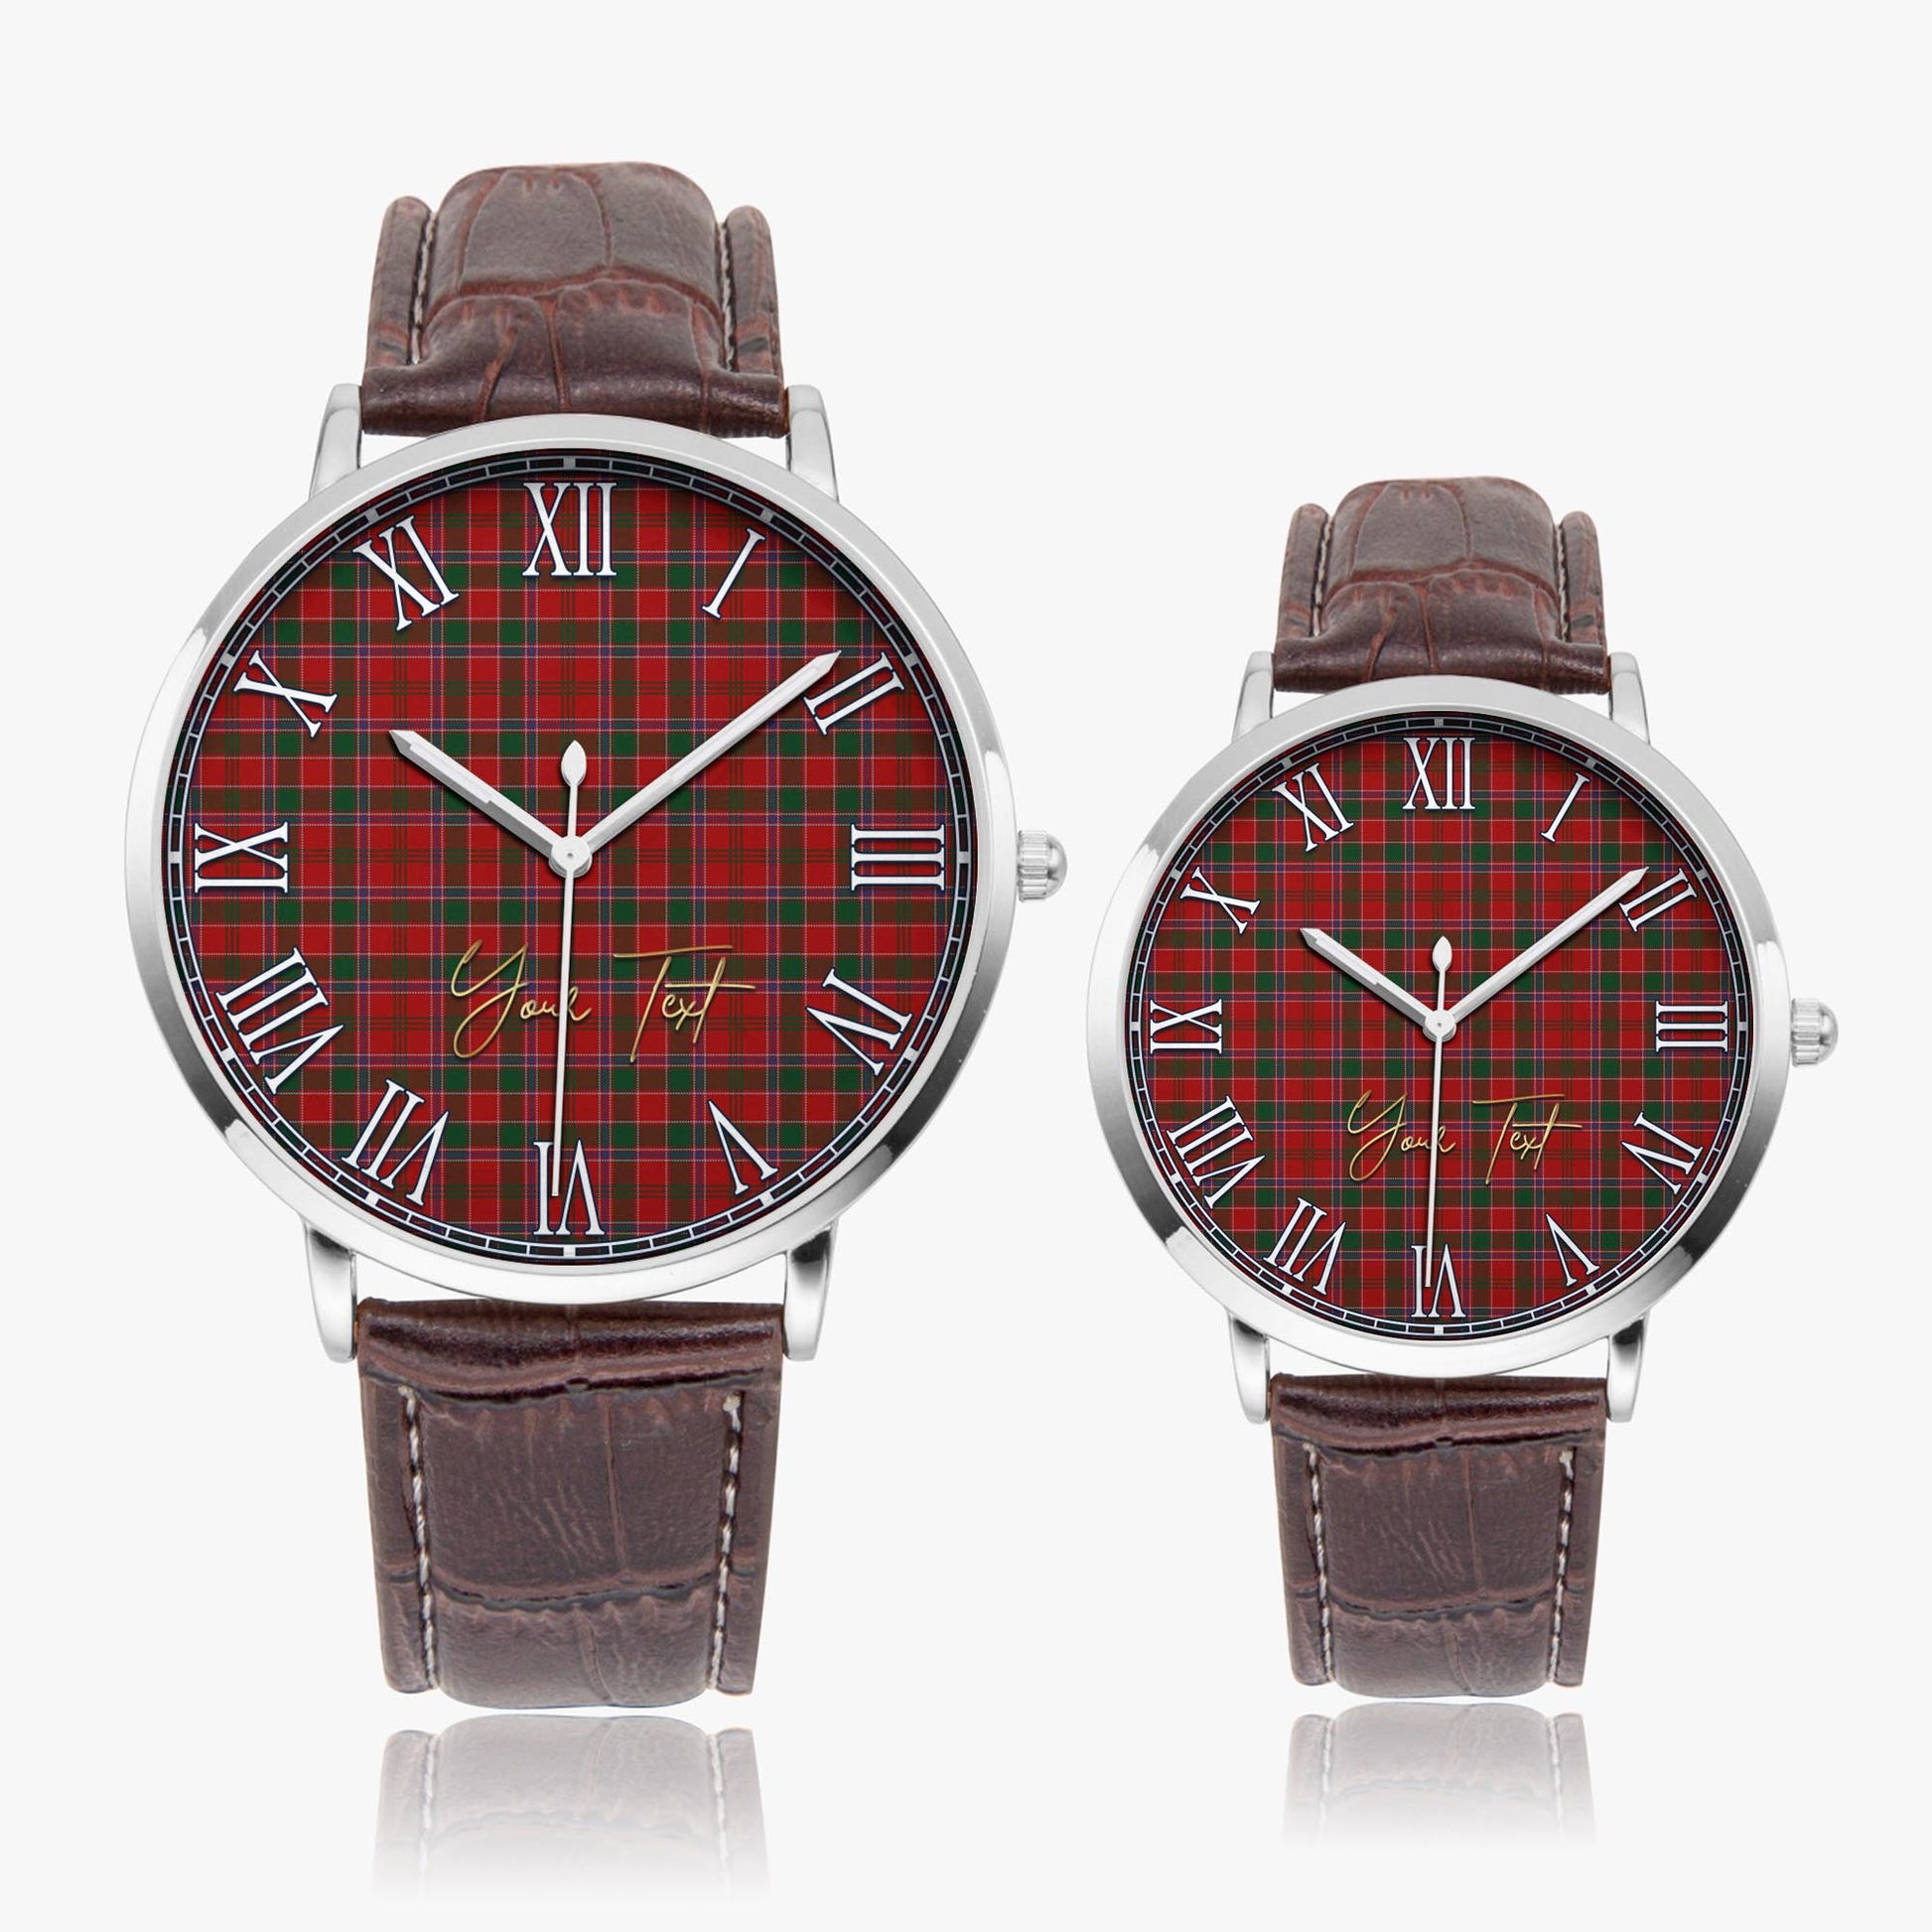 Dalzell (Dalziel) Tartan Personalized Your Text Leather Trap Quartz Watch Ultra Thin Silver Case With Brown Leather Strap - Tartanvibesclothing